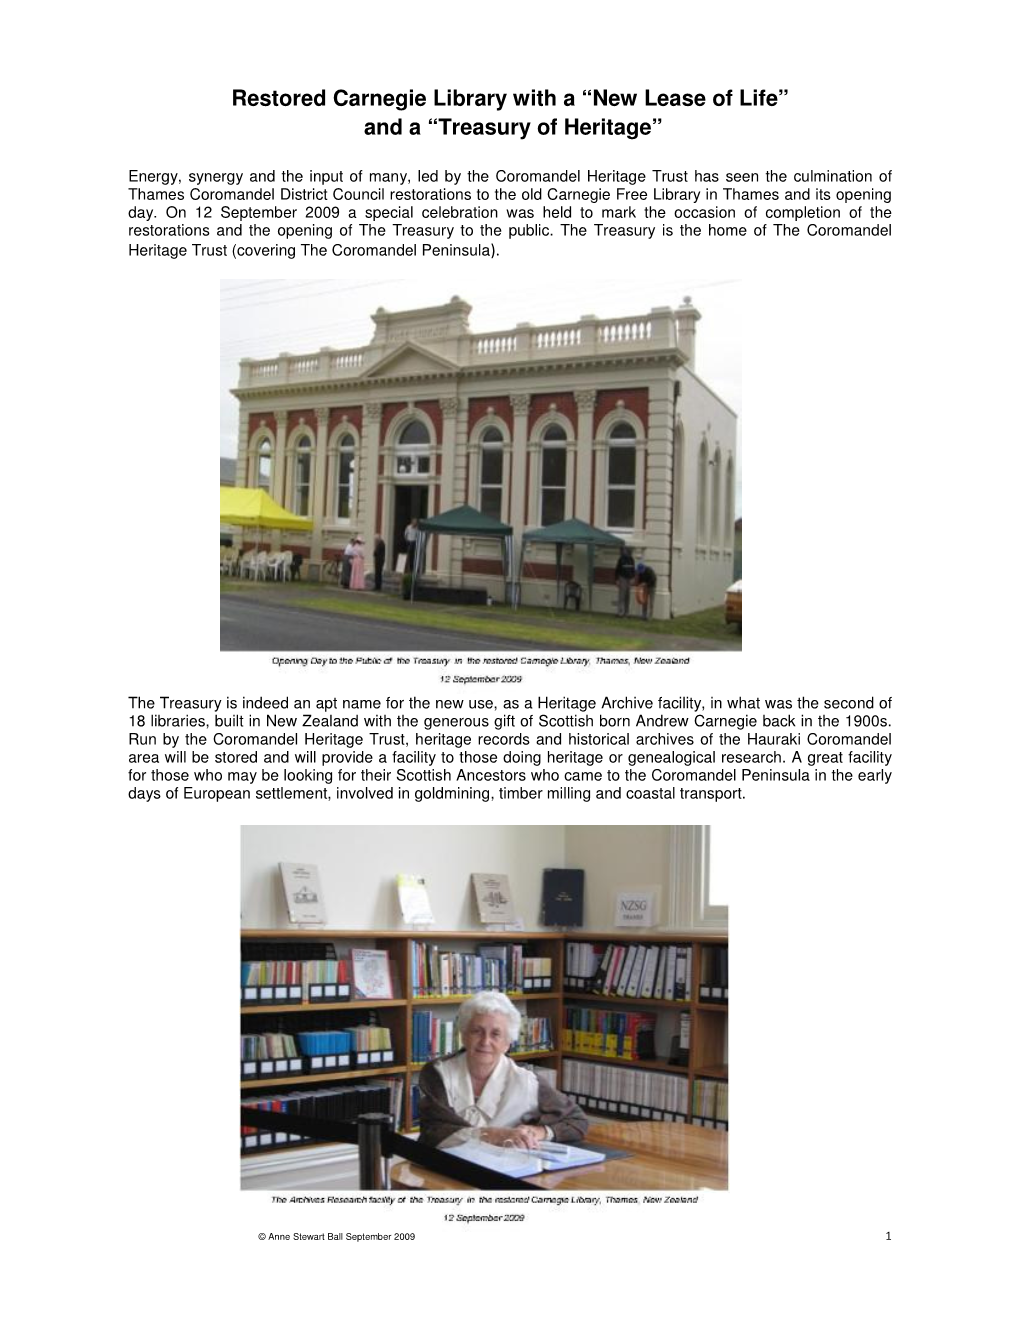 Restored Carnegie Library with a “New Lease of Life” and a “Treasury of Heritage”